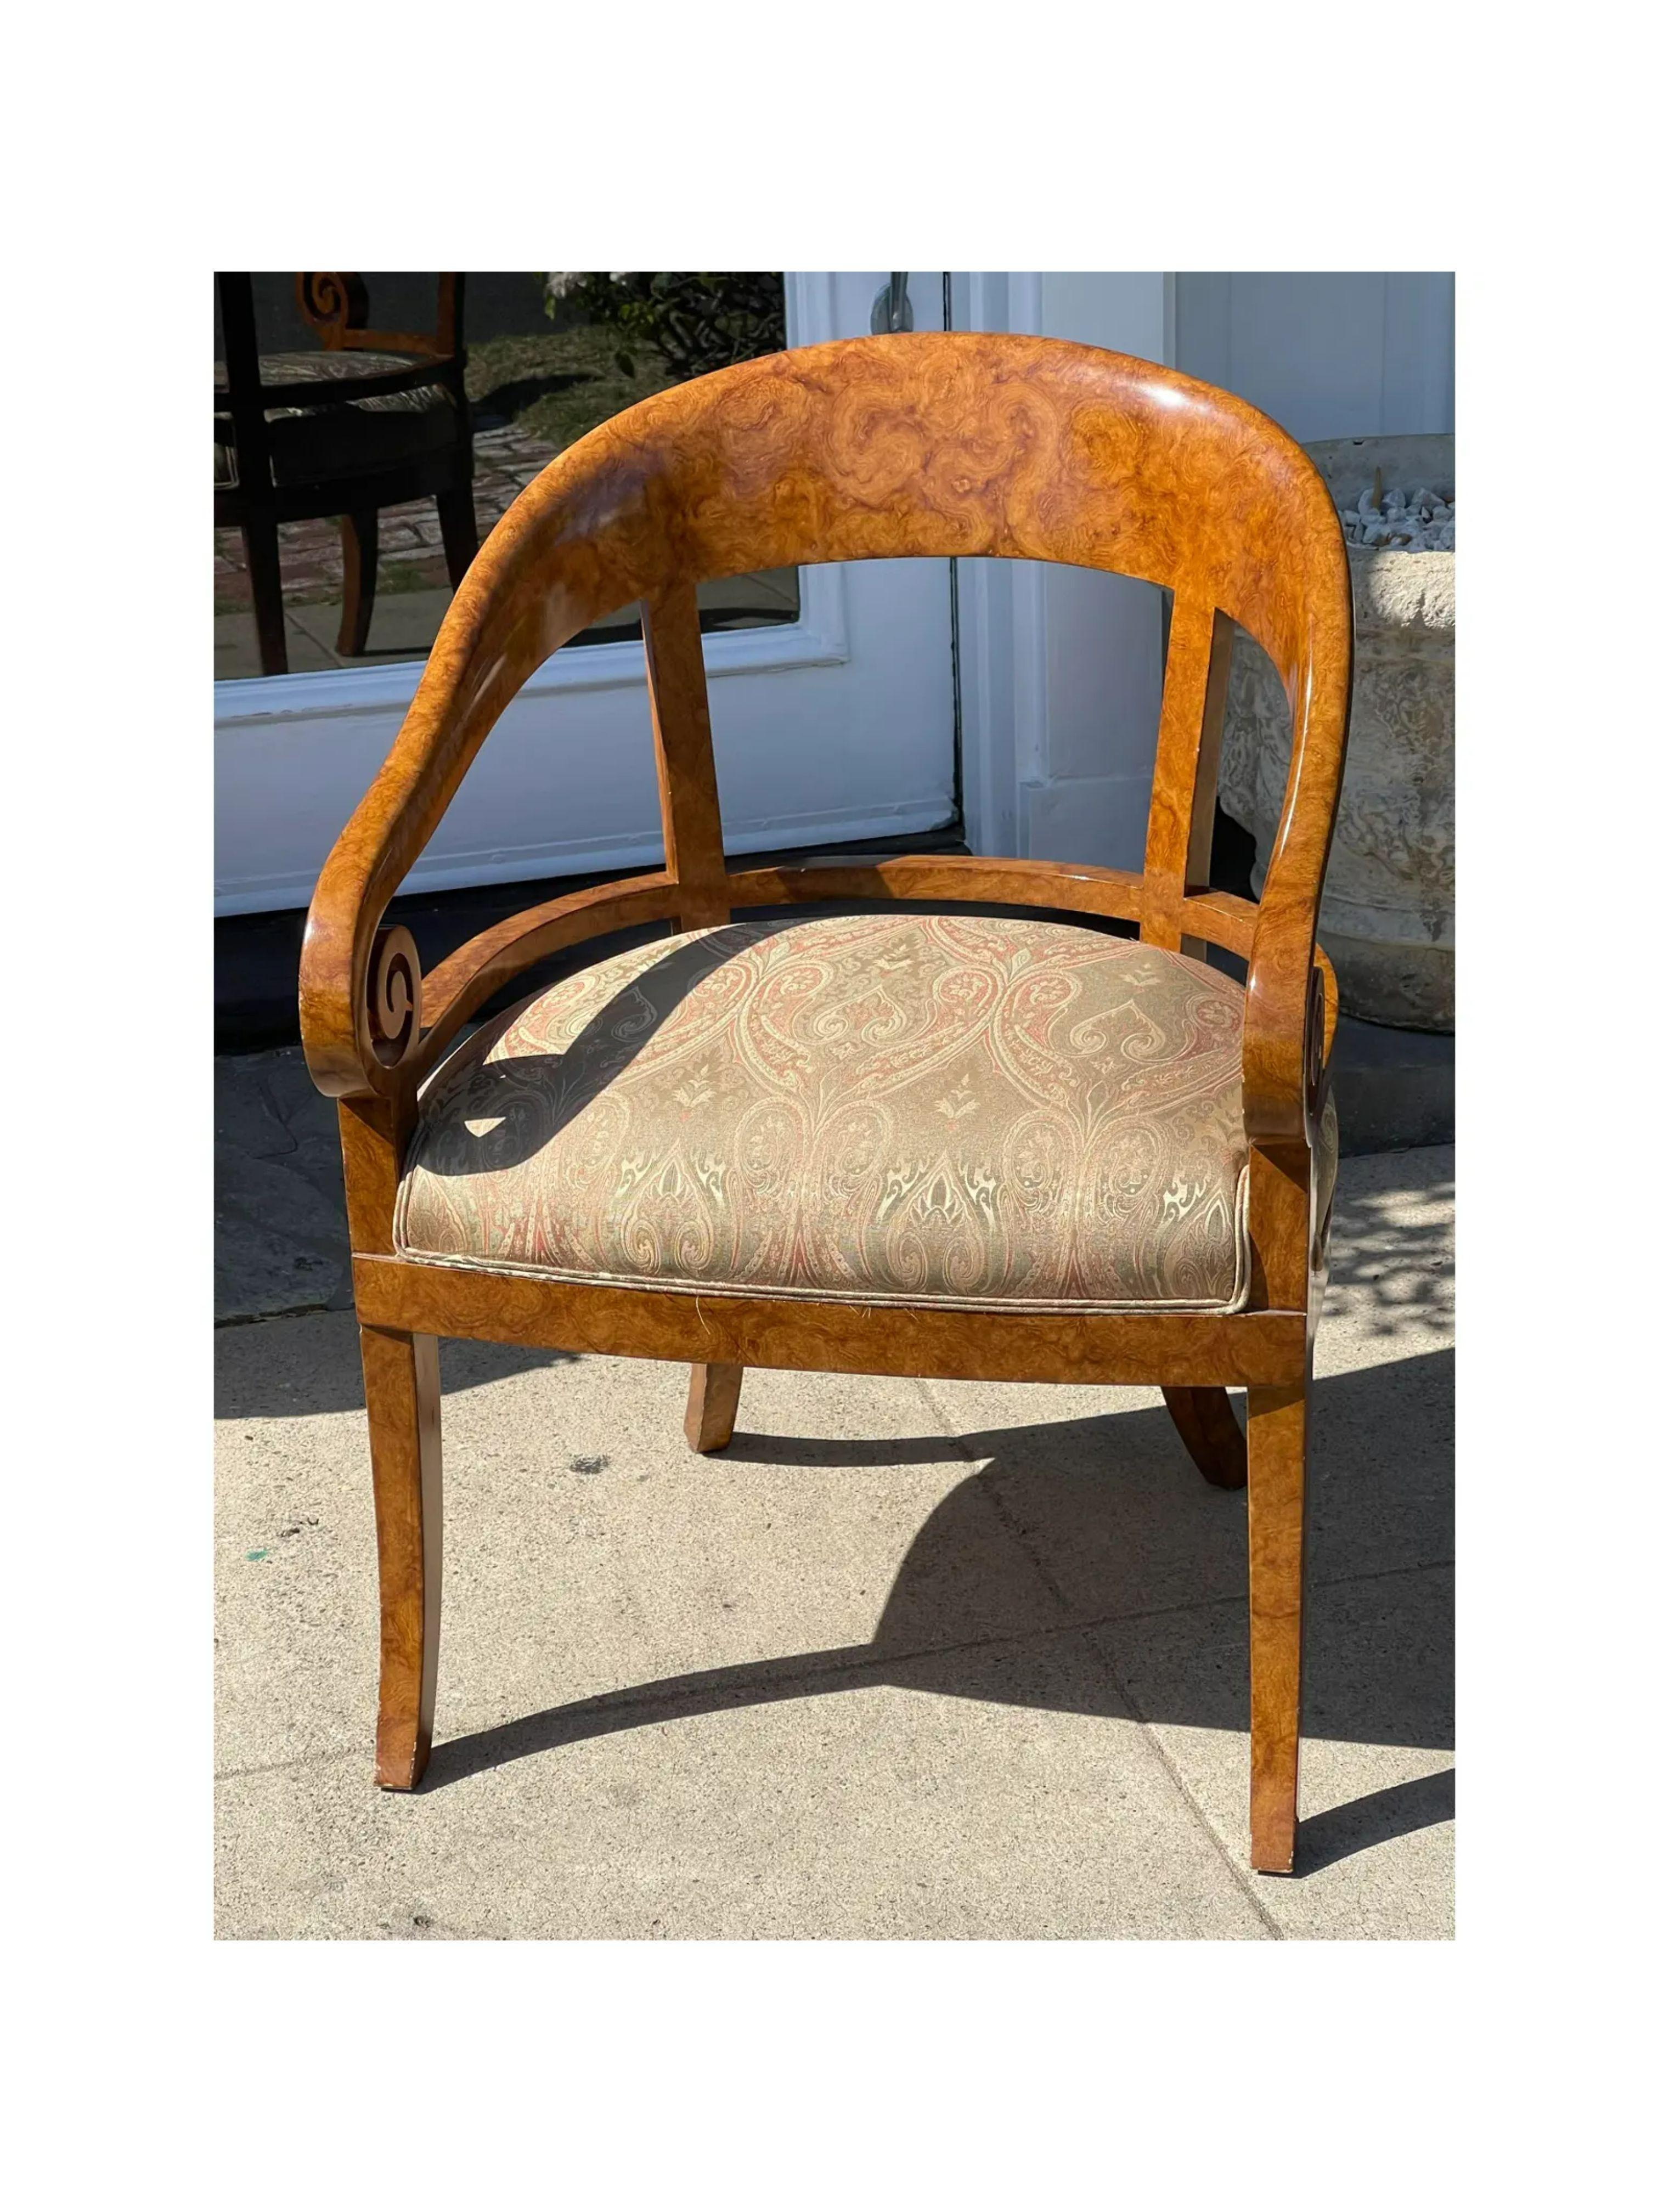 Wood Erika Brunson French Art Deco Style Fauteuil Barrel Chair, 1990s